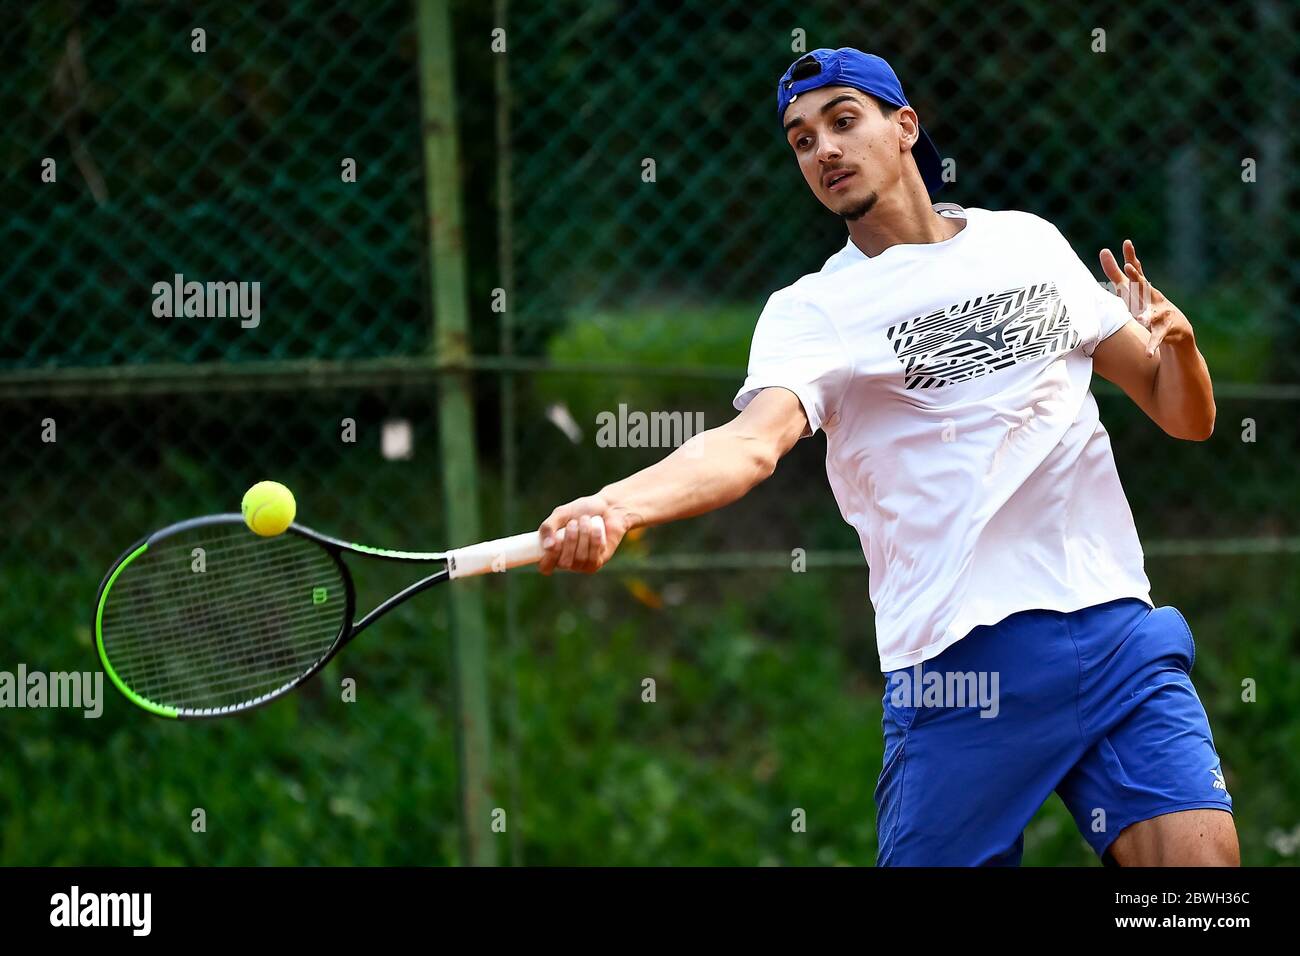 Turin, Italy - 01 June, 2020: Lorenzo Sonego, currently number 46 of ATP  ranking, plays a forehand during a tennis training. Athletes have started  training again after the lockdown caused by COVID-19